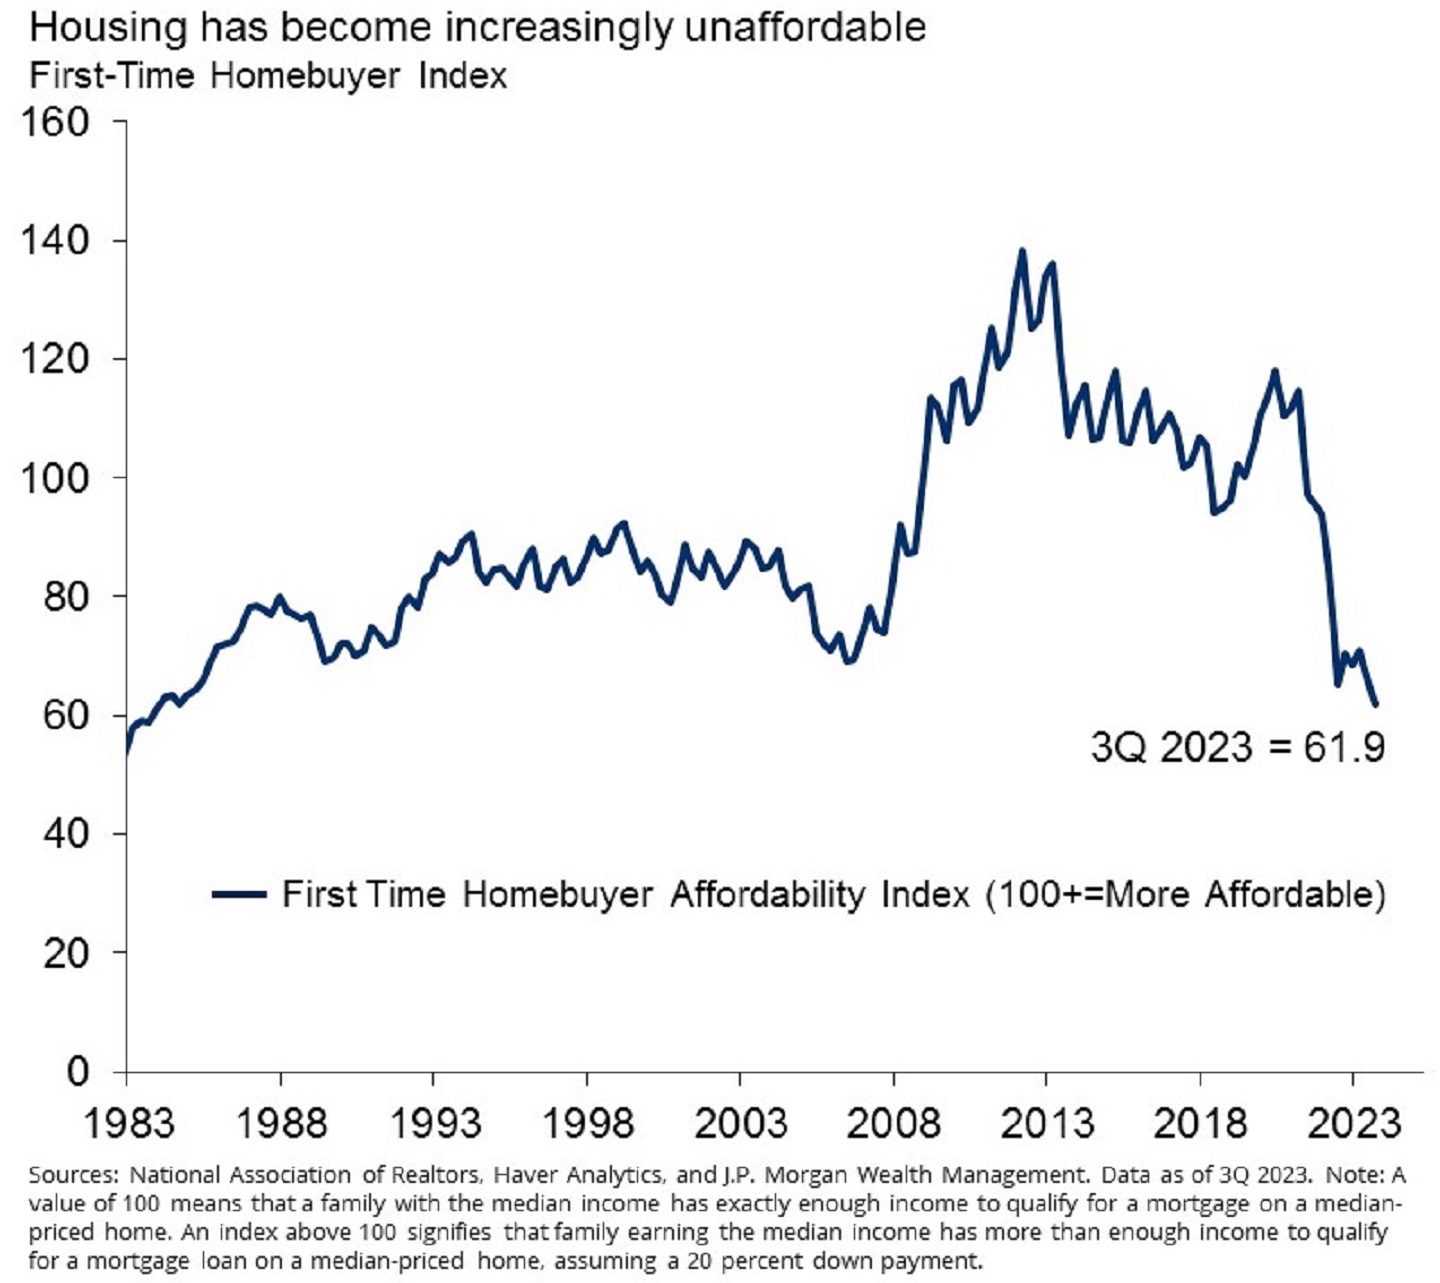 This chart shows the first time homebuyer affordability index from 1983 to 3Q 2023.